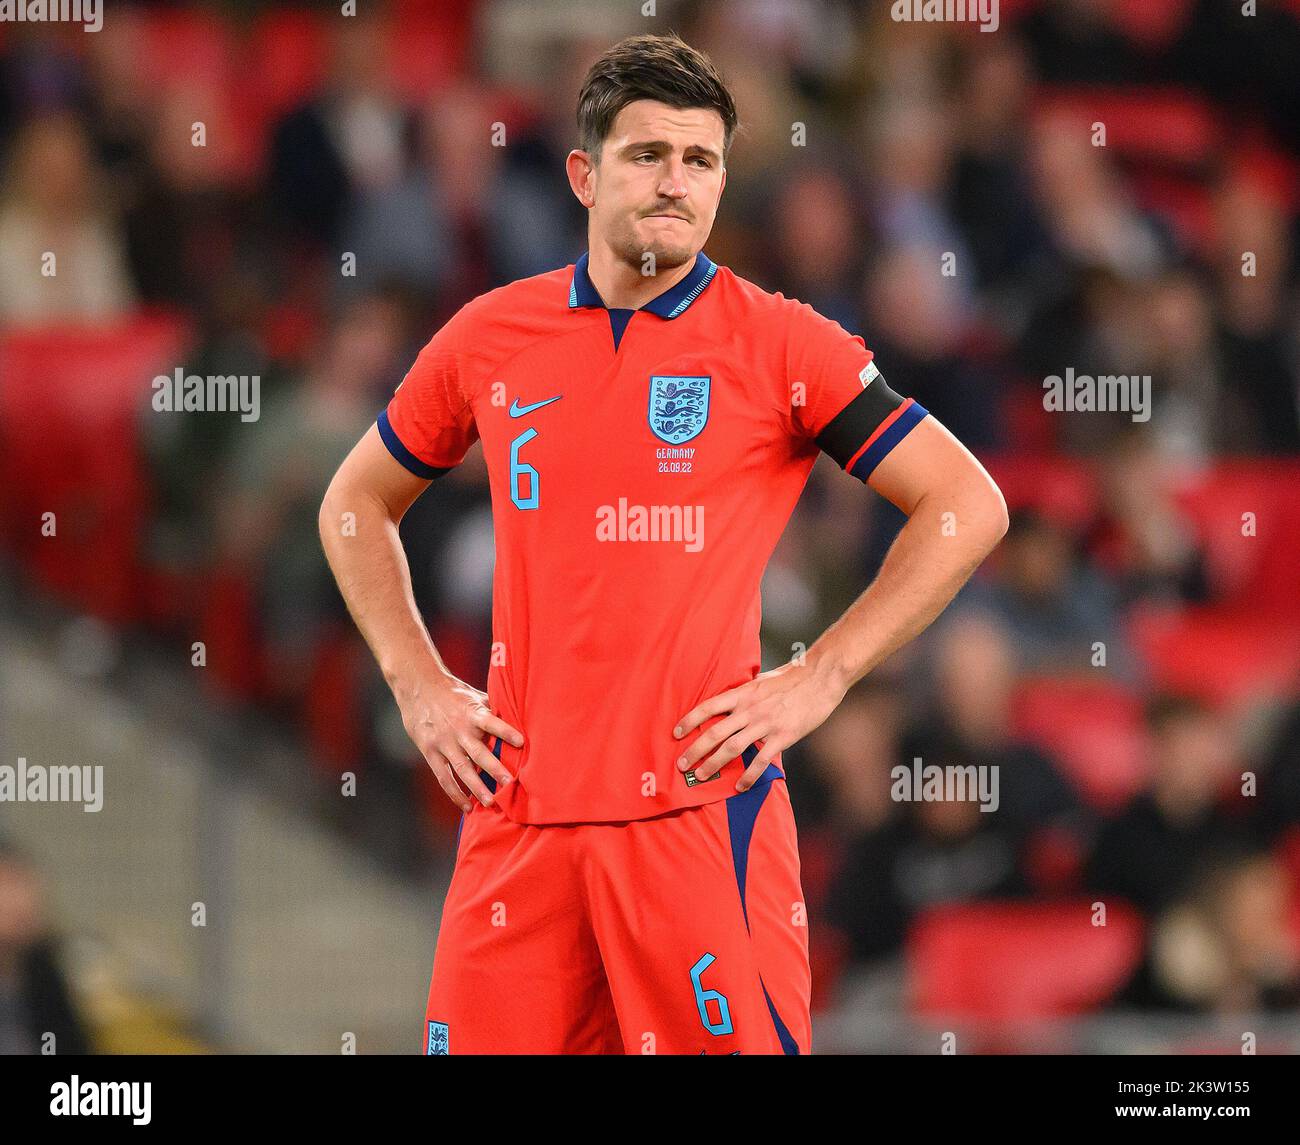 26 Sep 2022 - England v Germany - UEFA Nations League - League A - Group 3 - Wembley Stadium  England's Harry Maguire looks dejected after conceding a penalty during the UEFA Nations League match against Germany. Picture : Mark Pain / Alamy Live News Stock Photo